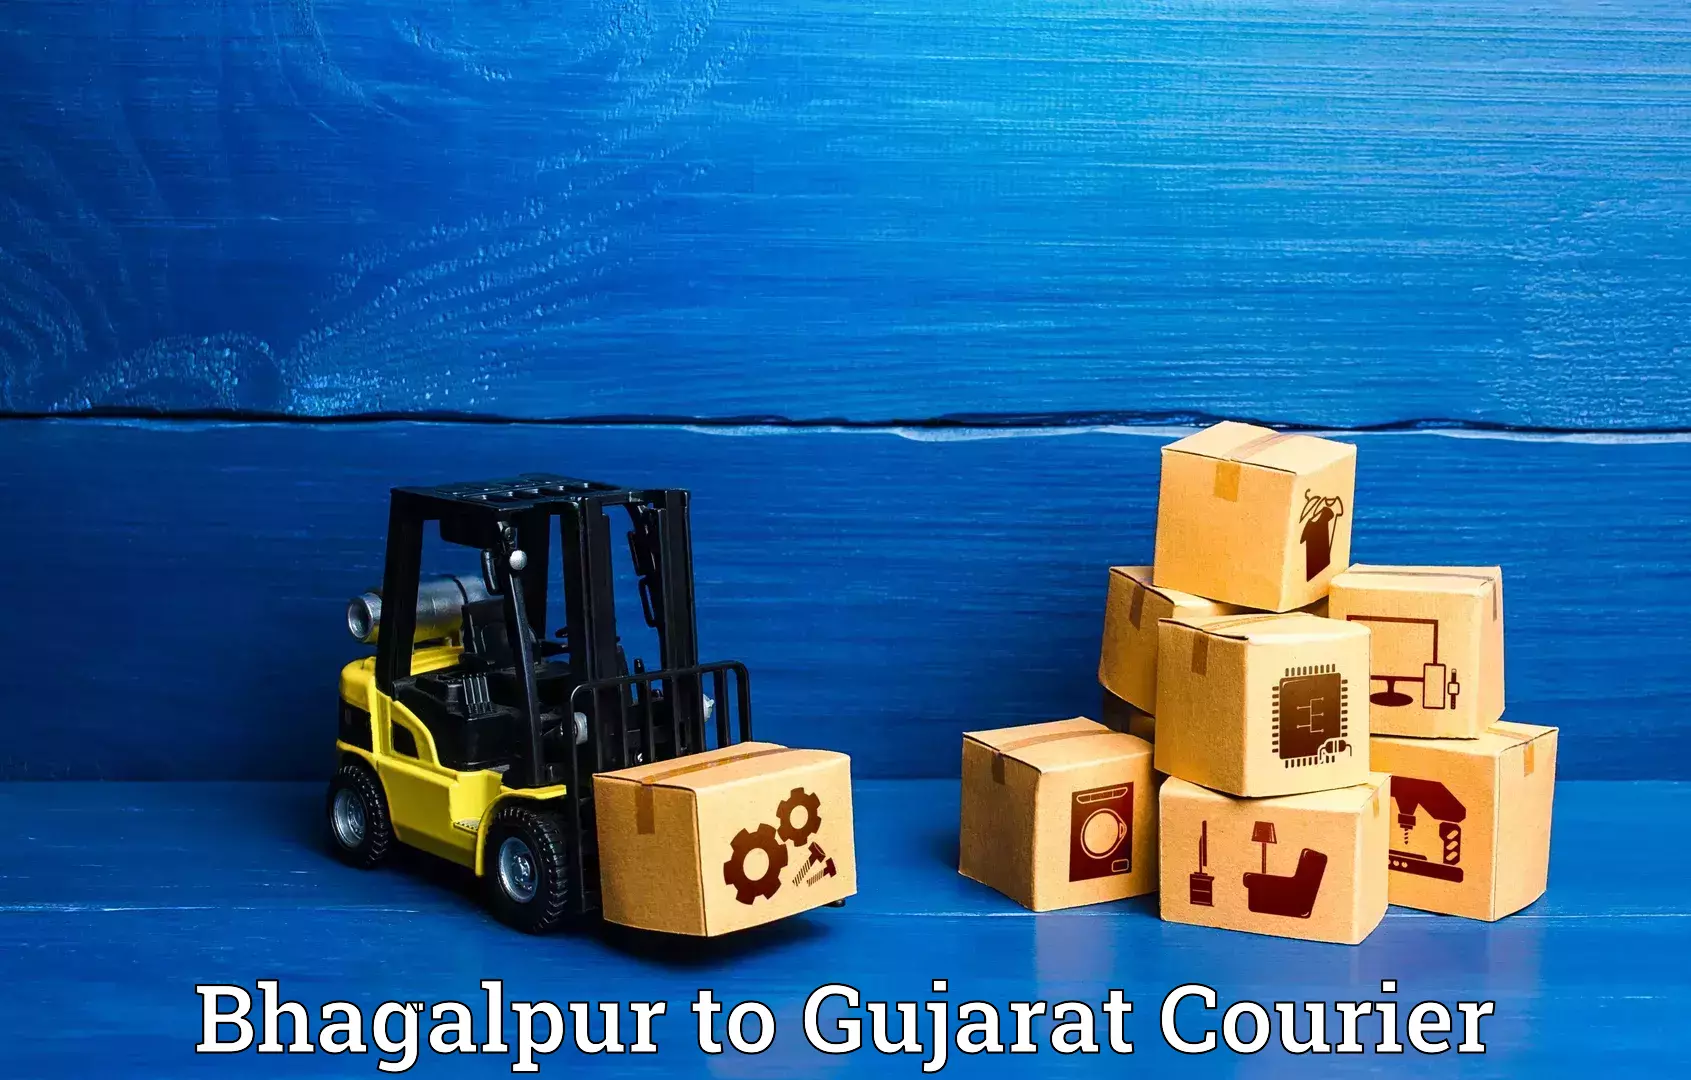 Luggage delivery network Bhagalpur to Rajkot